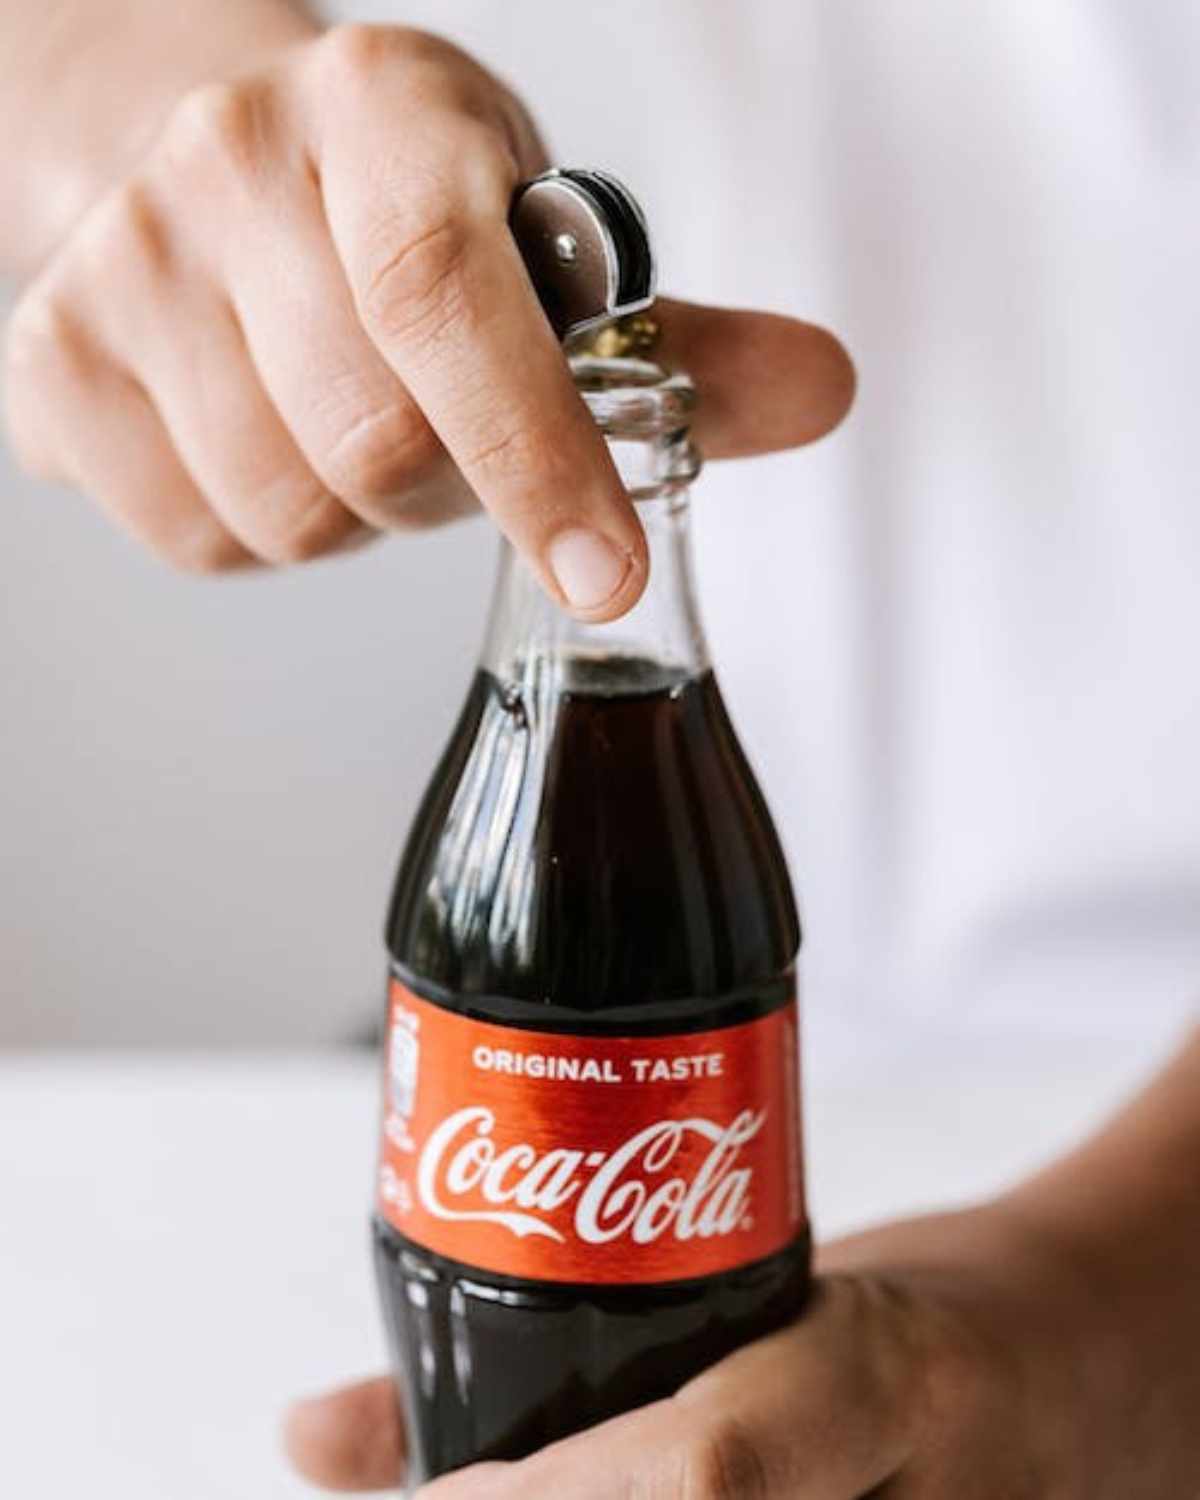 A hand opening a coca cola bottle.